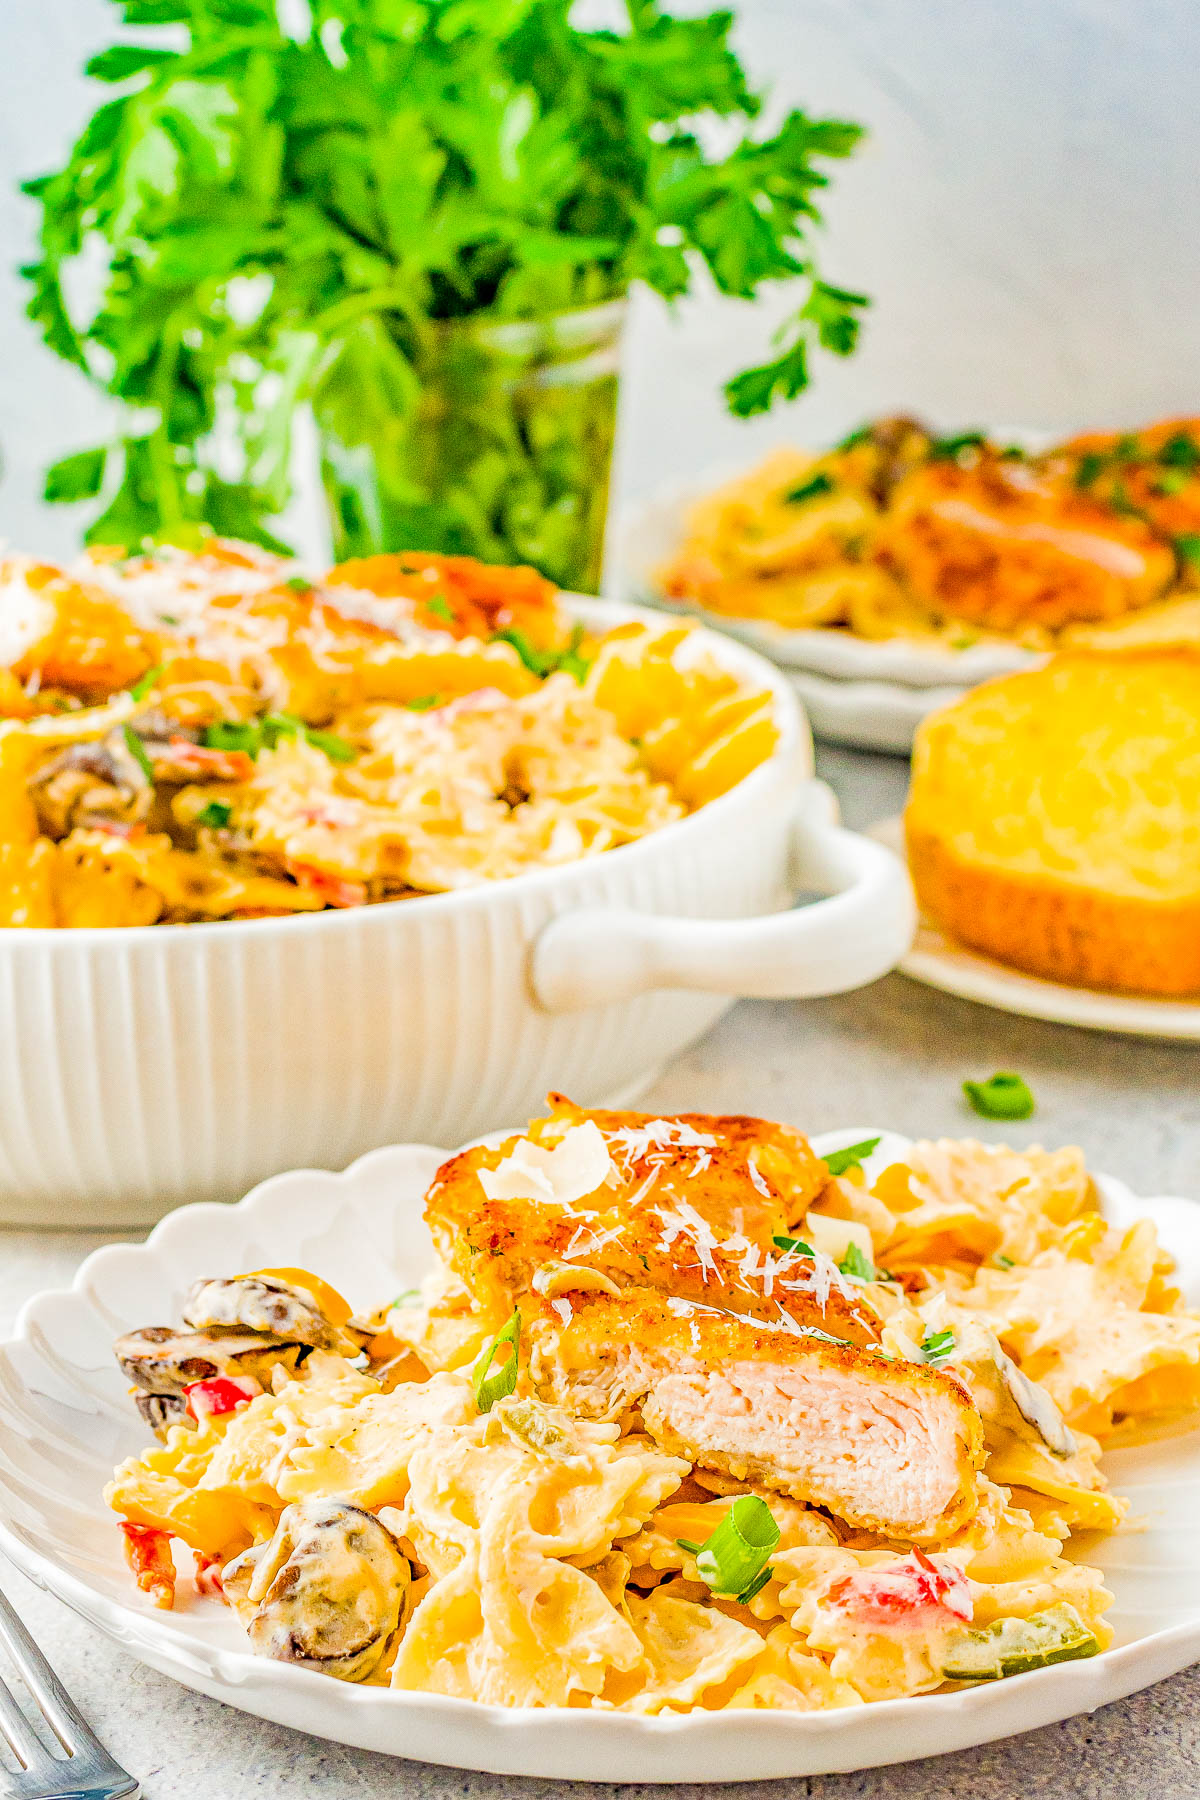 Creamy Cajun Chicken Pasta - Juicy Parmesan-crusted chicken and tender pasta with vegetables are tossed together in a creamy Cajun sauce making this recipe a family FAVORITE! My homemade version is a Chili's Restaurant copycat but I assure you, this is a better-than-the-restaurant dish you'll want to put on rotation even on busy weeknights!